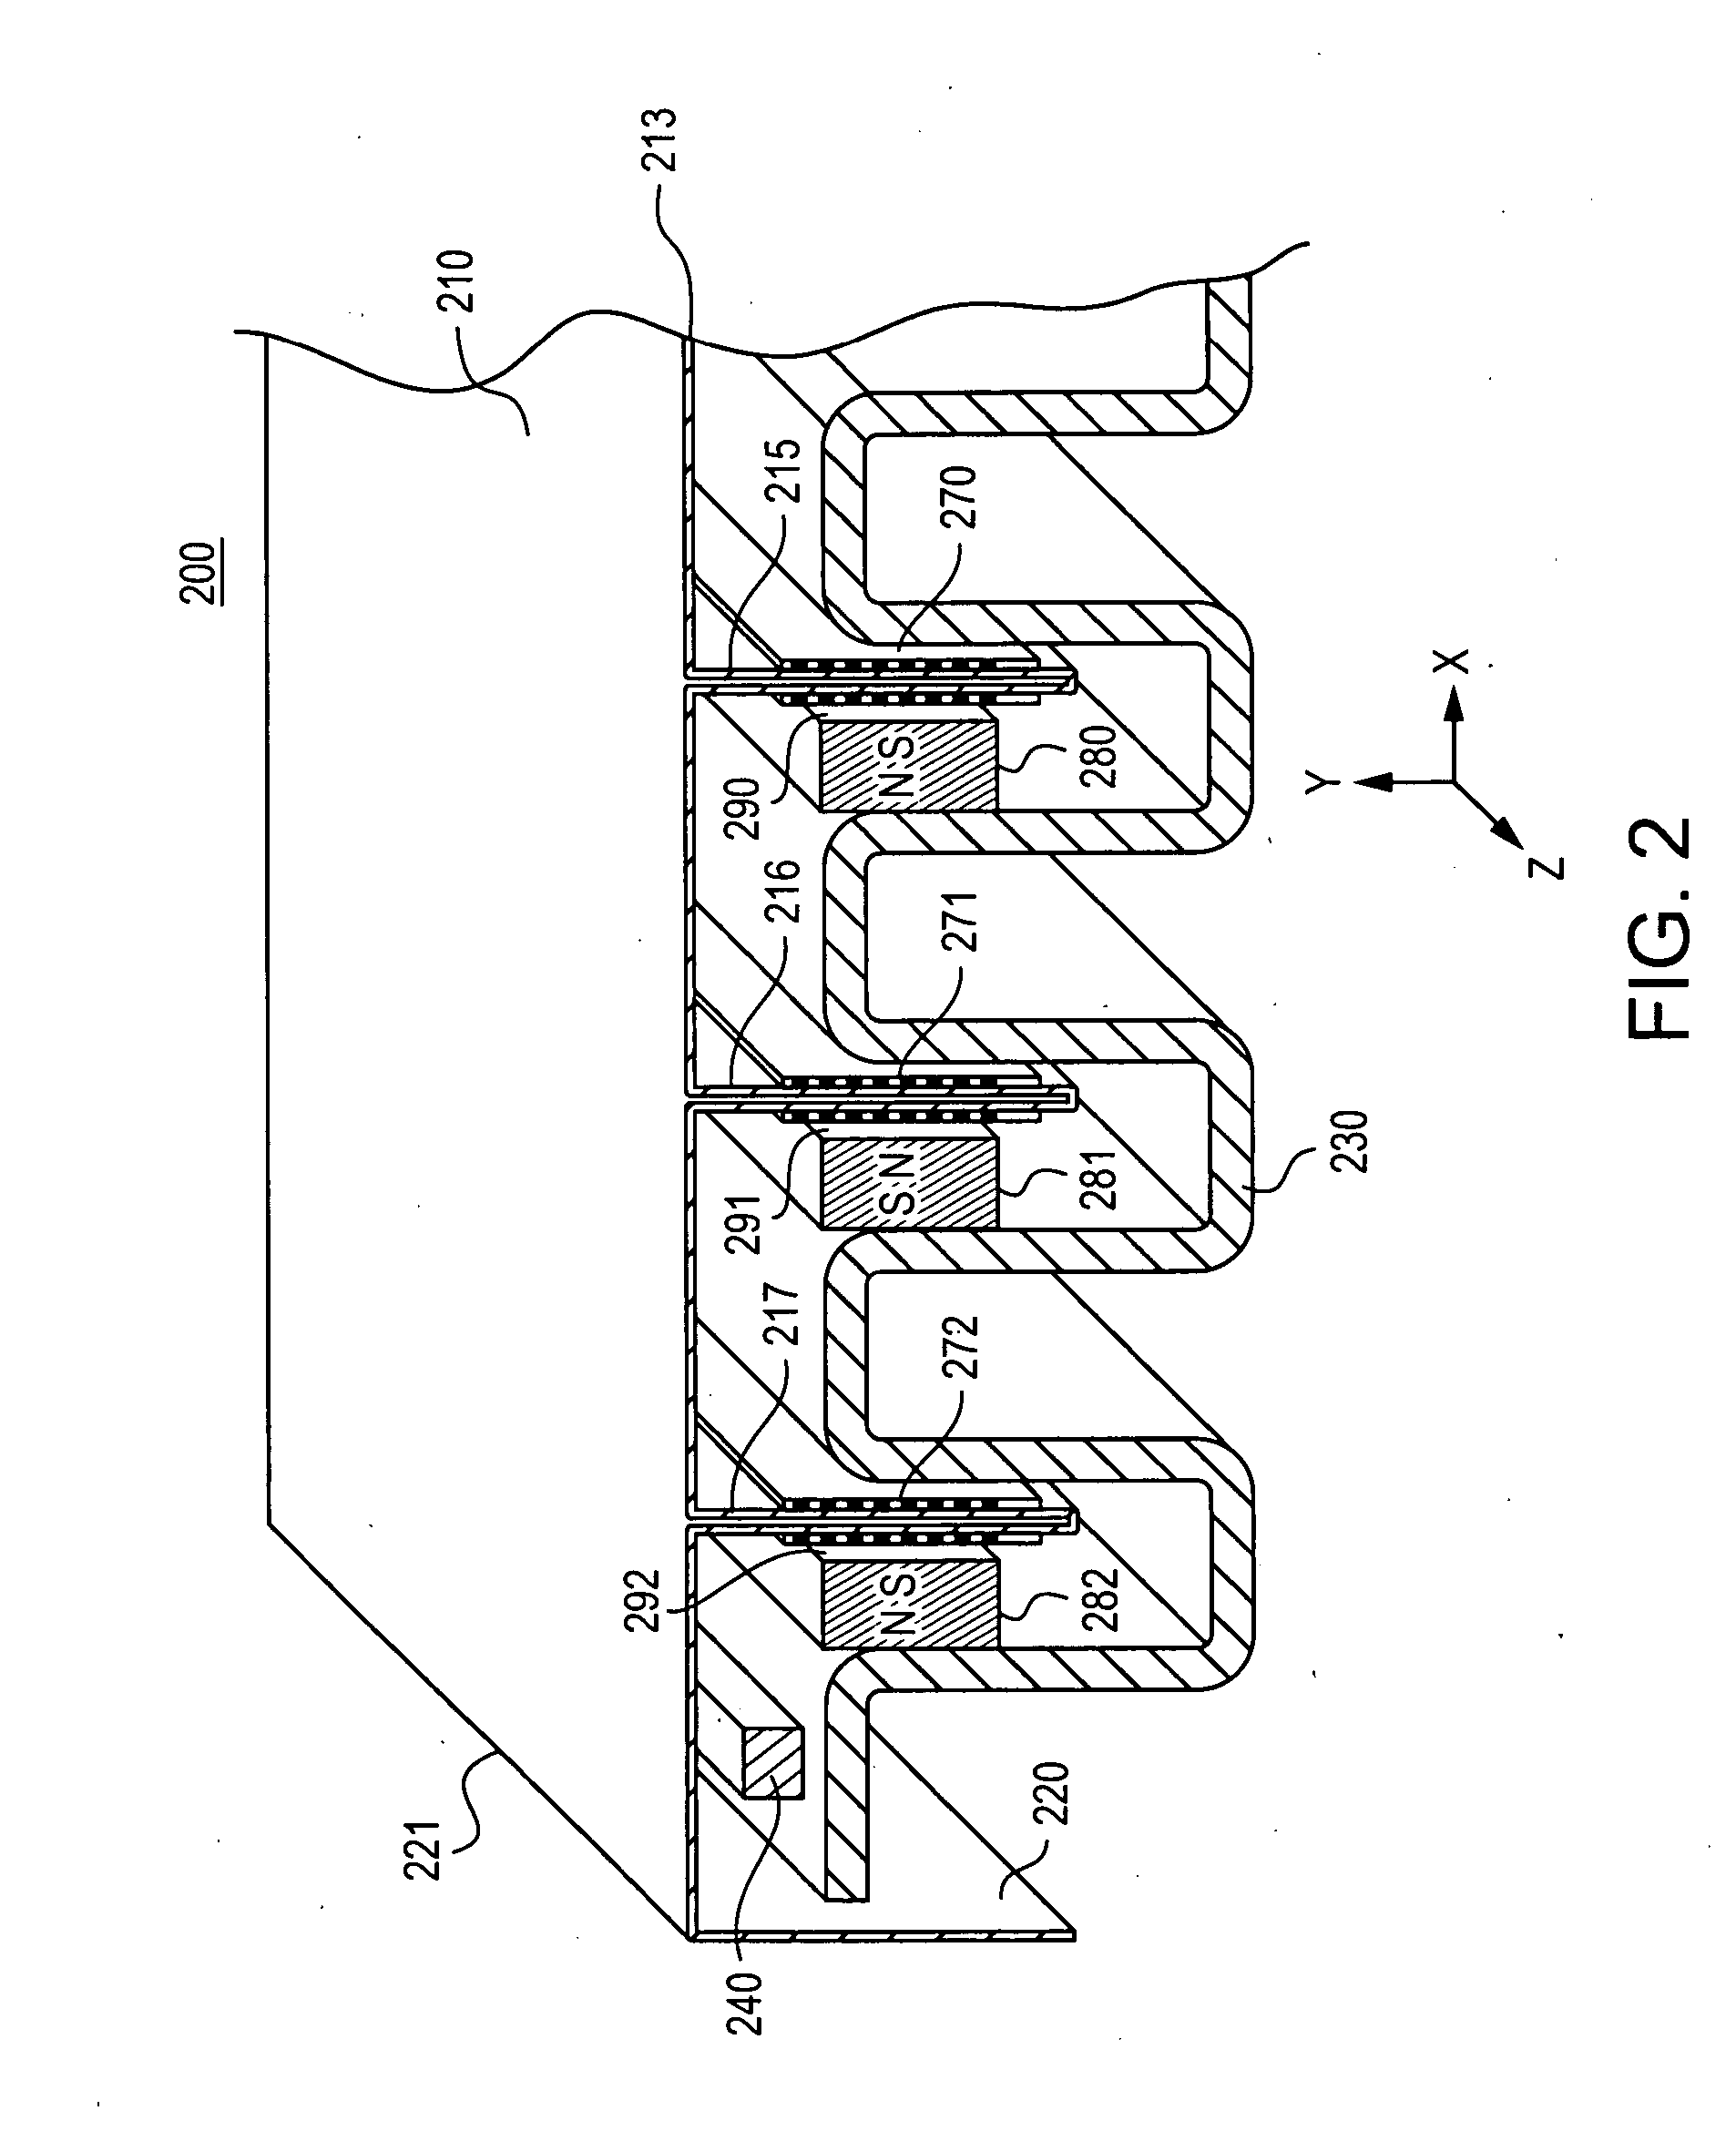 Acoustic transducer with mechanical balancing